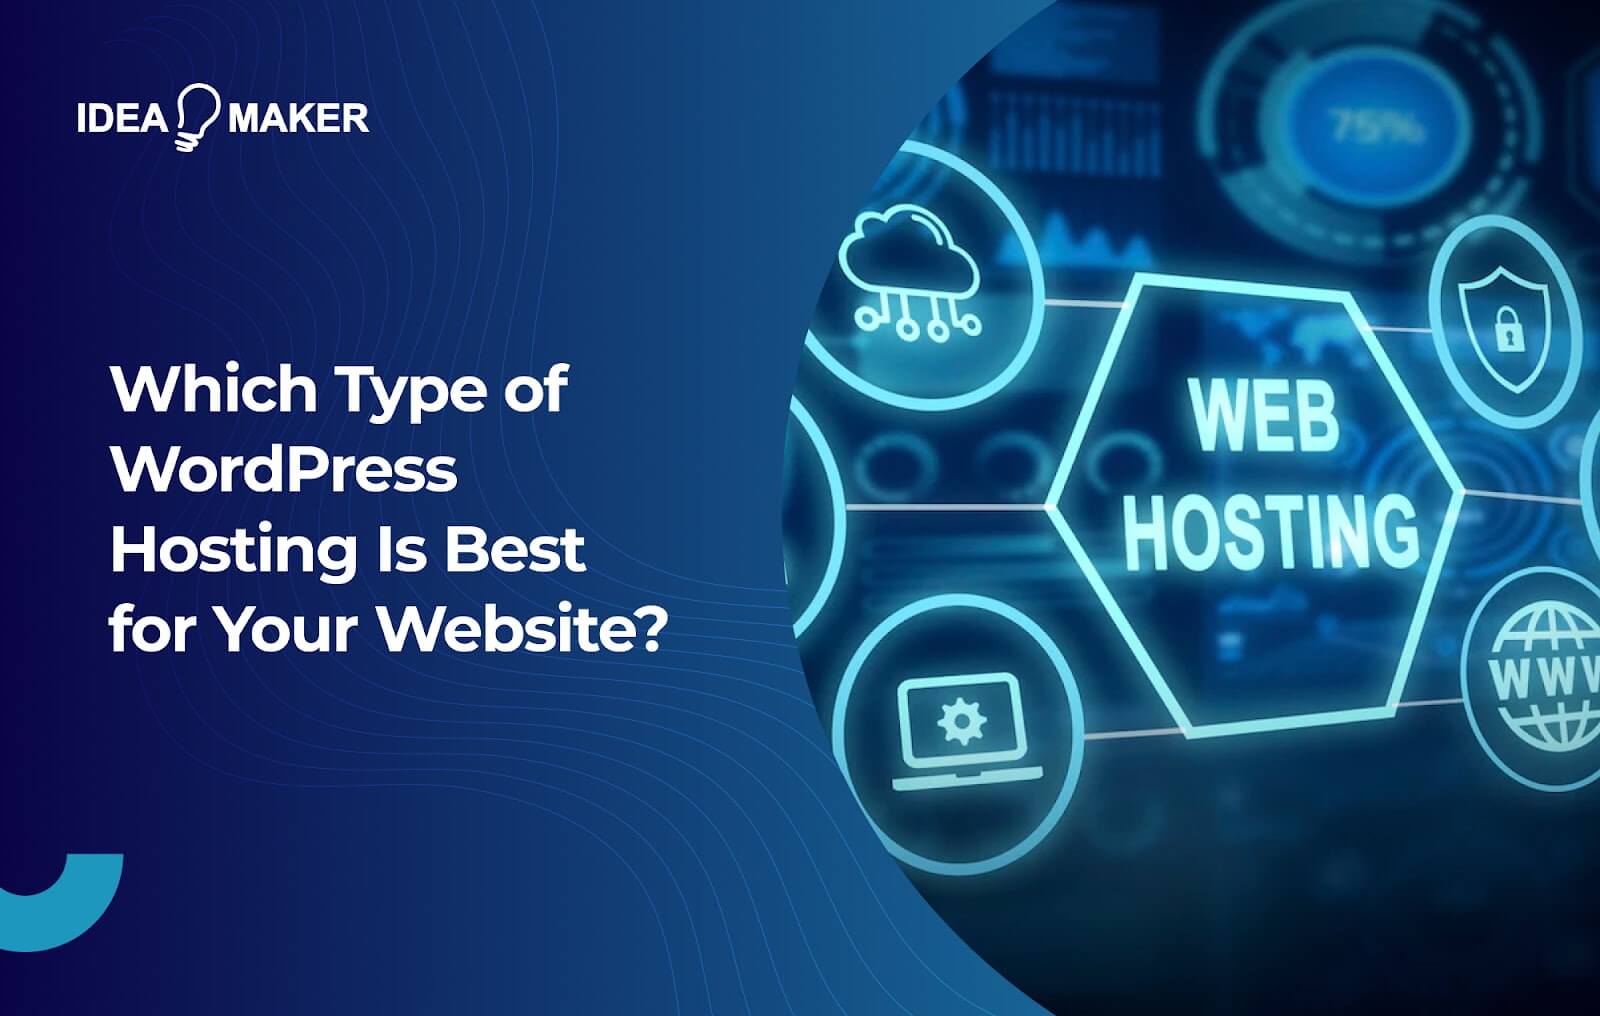 Ideamaker - Which Type of WordPress Hosting Is Best for Your Website